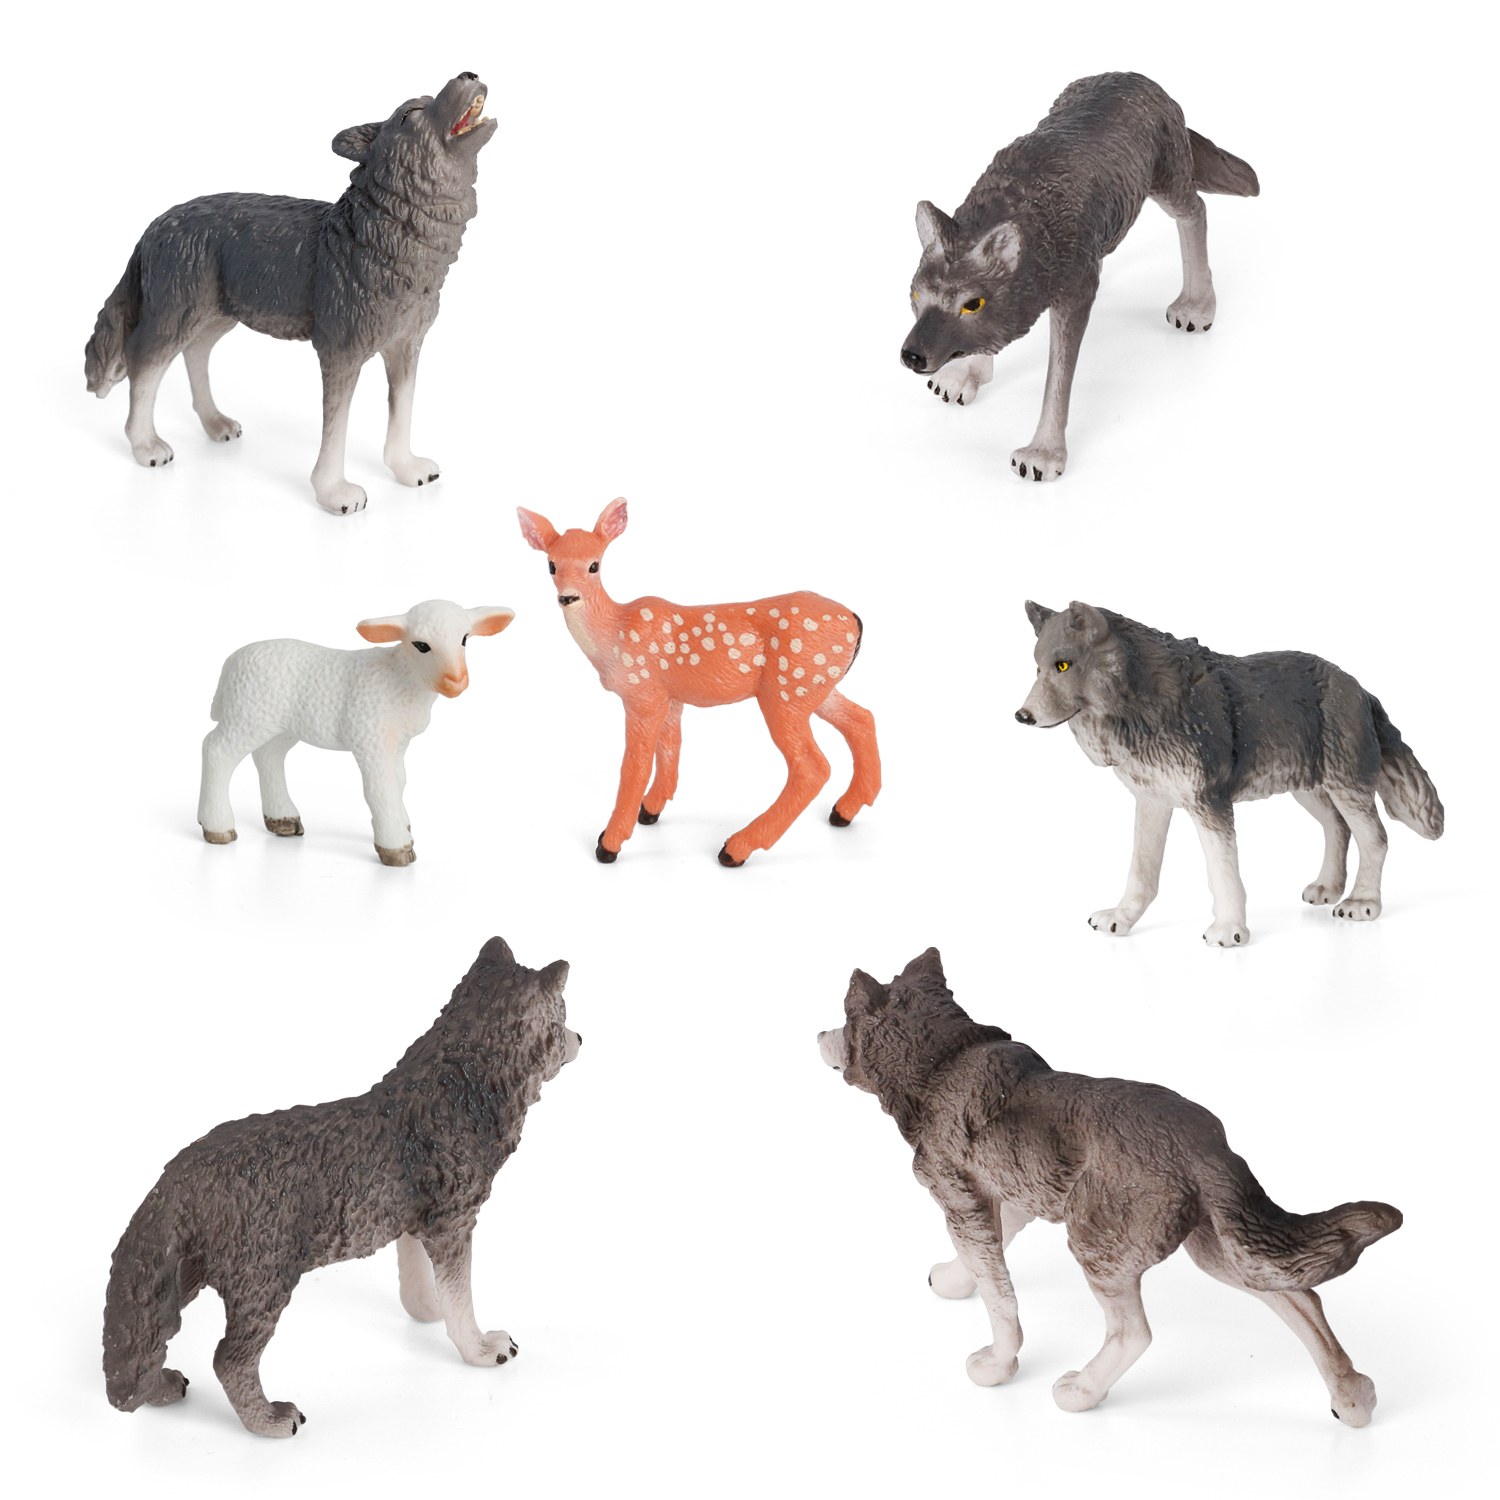 4pcs Wolf Toy Figurines Set Arctic Wolf Animal Figures White Wolf Family Cake Topper Toy Gift for Kids White 